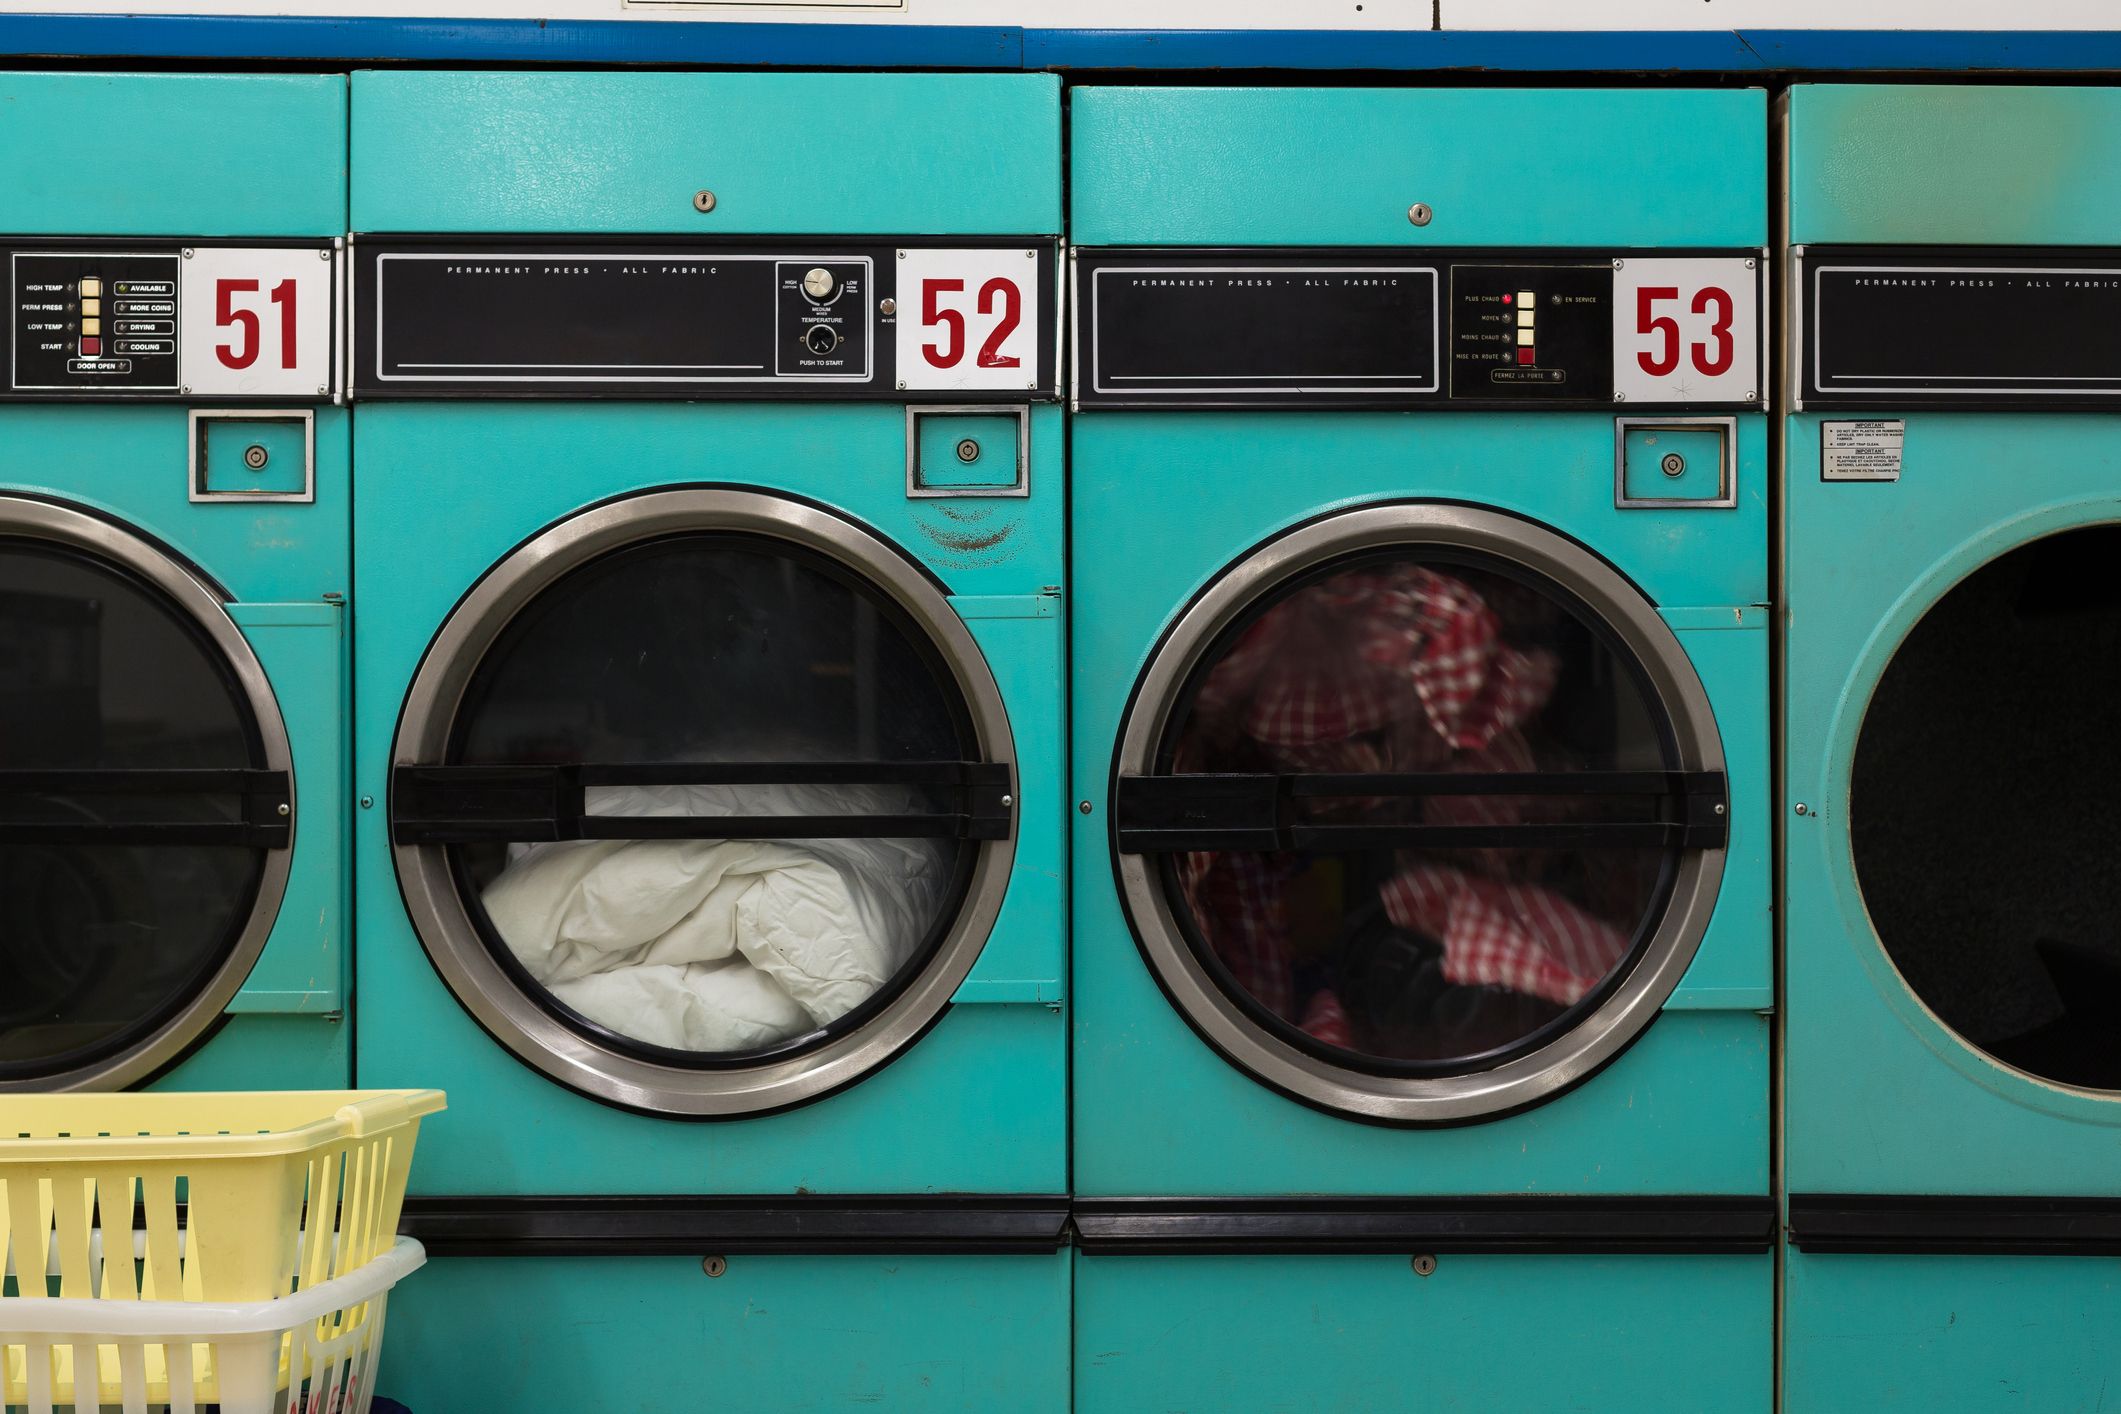 https://hips.hearstapps.com/hmg-prod/images/row-of-clothes-dryers-laundromat-royalty-free-image-470450361-1564089661.jpg